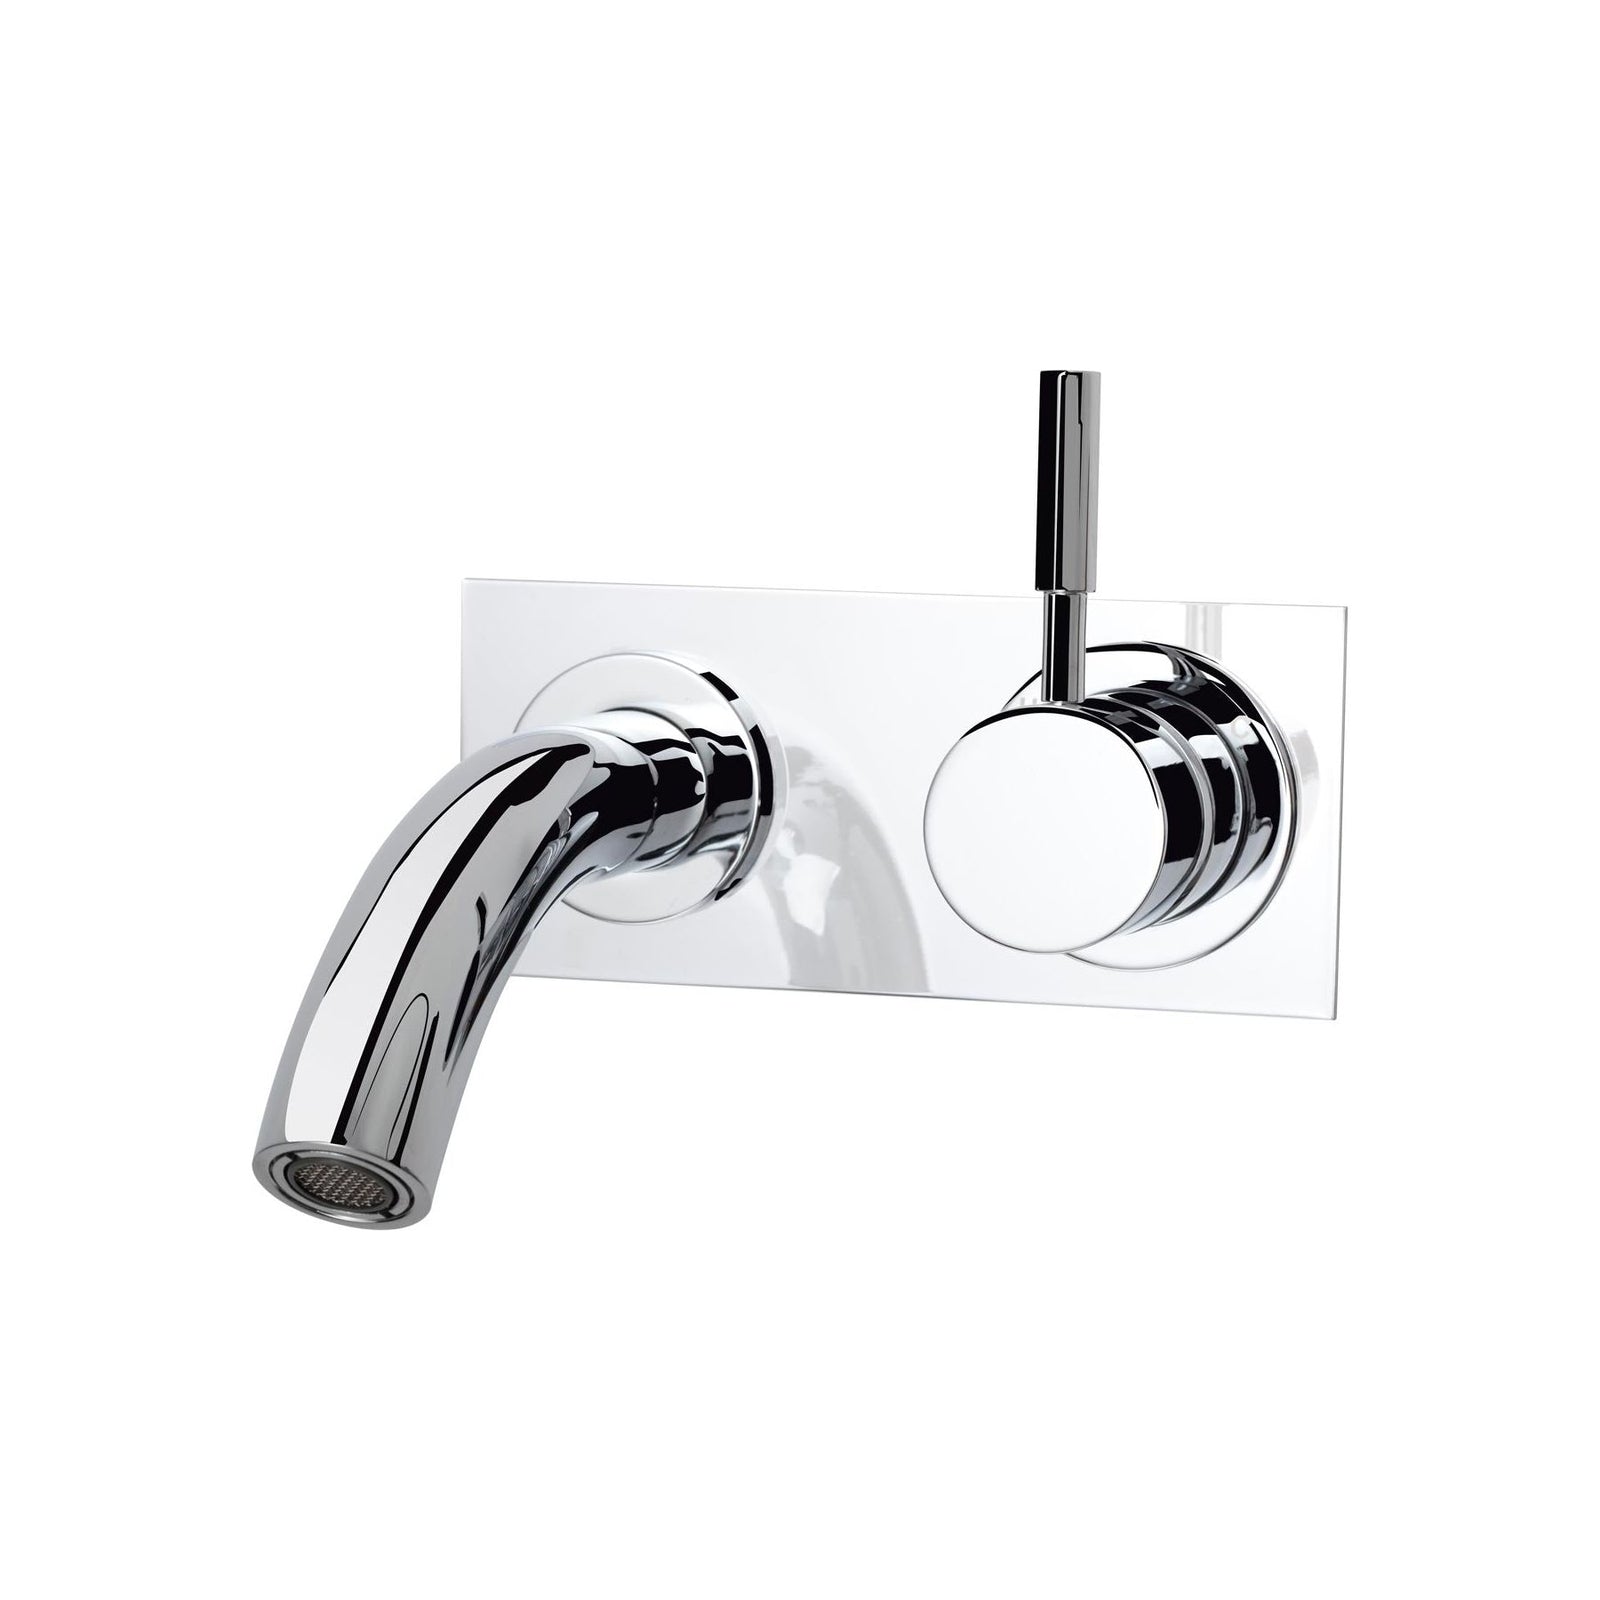 Voda Wall Basin Mixer Outlet System 160mm Outlet